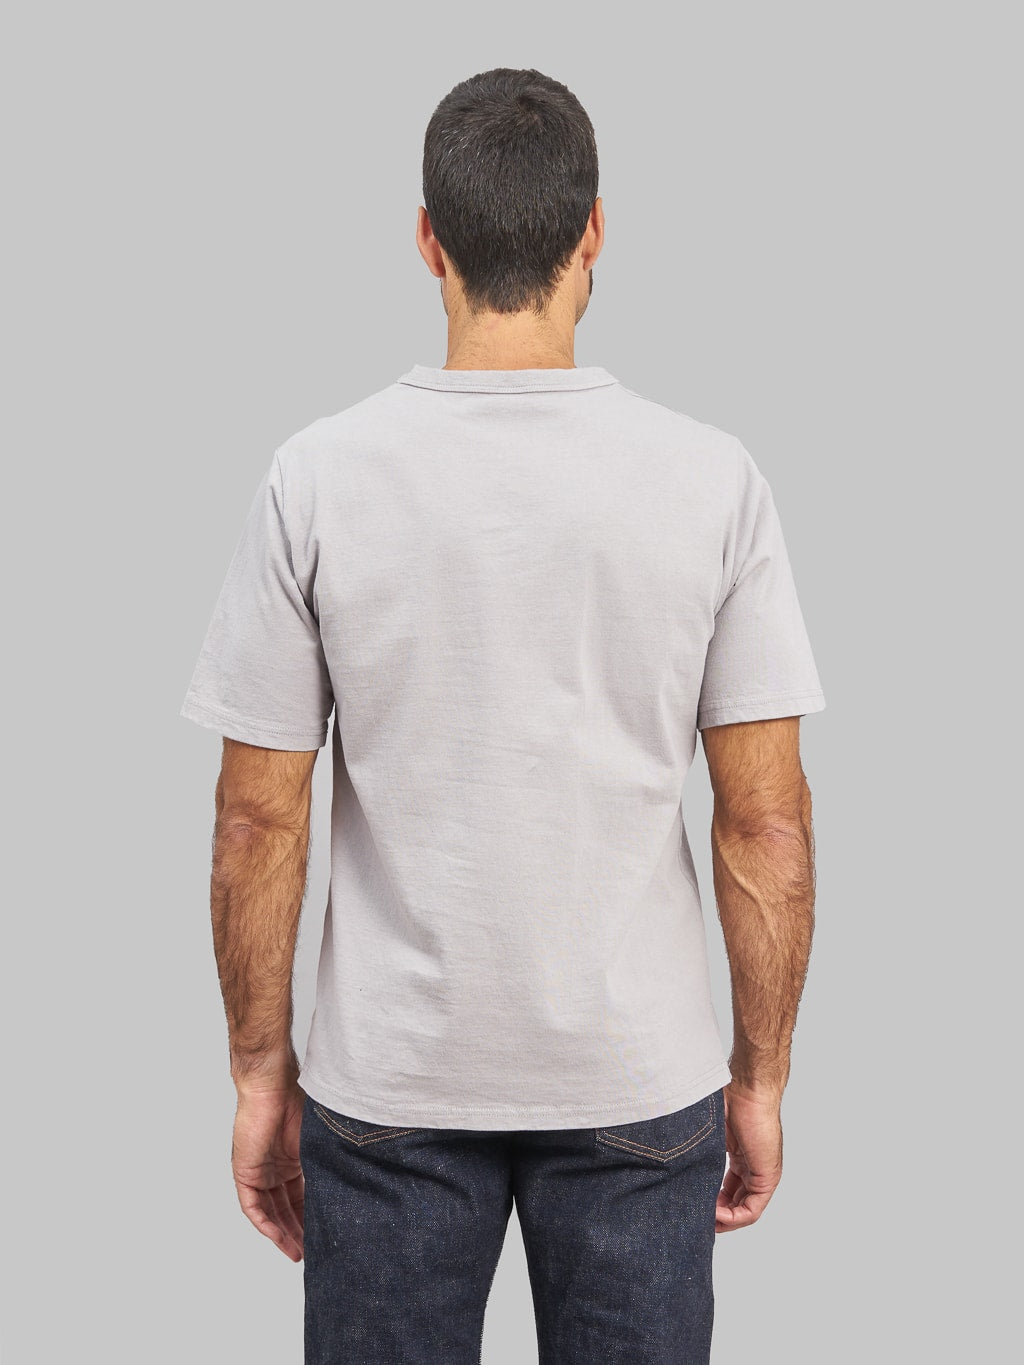 Jackman Lead Off TShirt grey midweight back fit